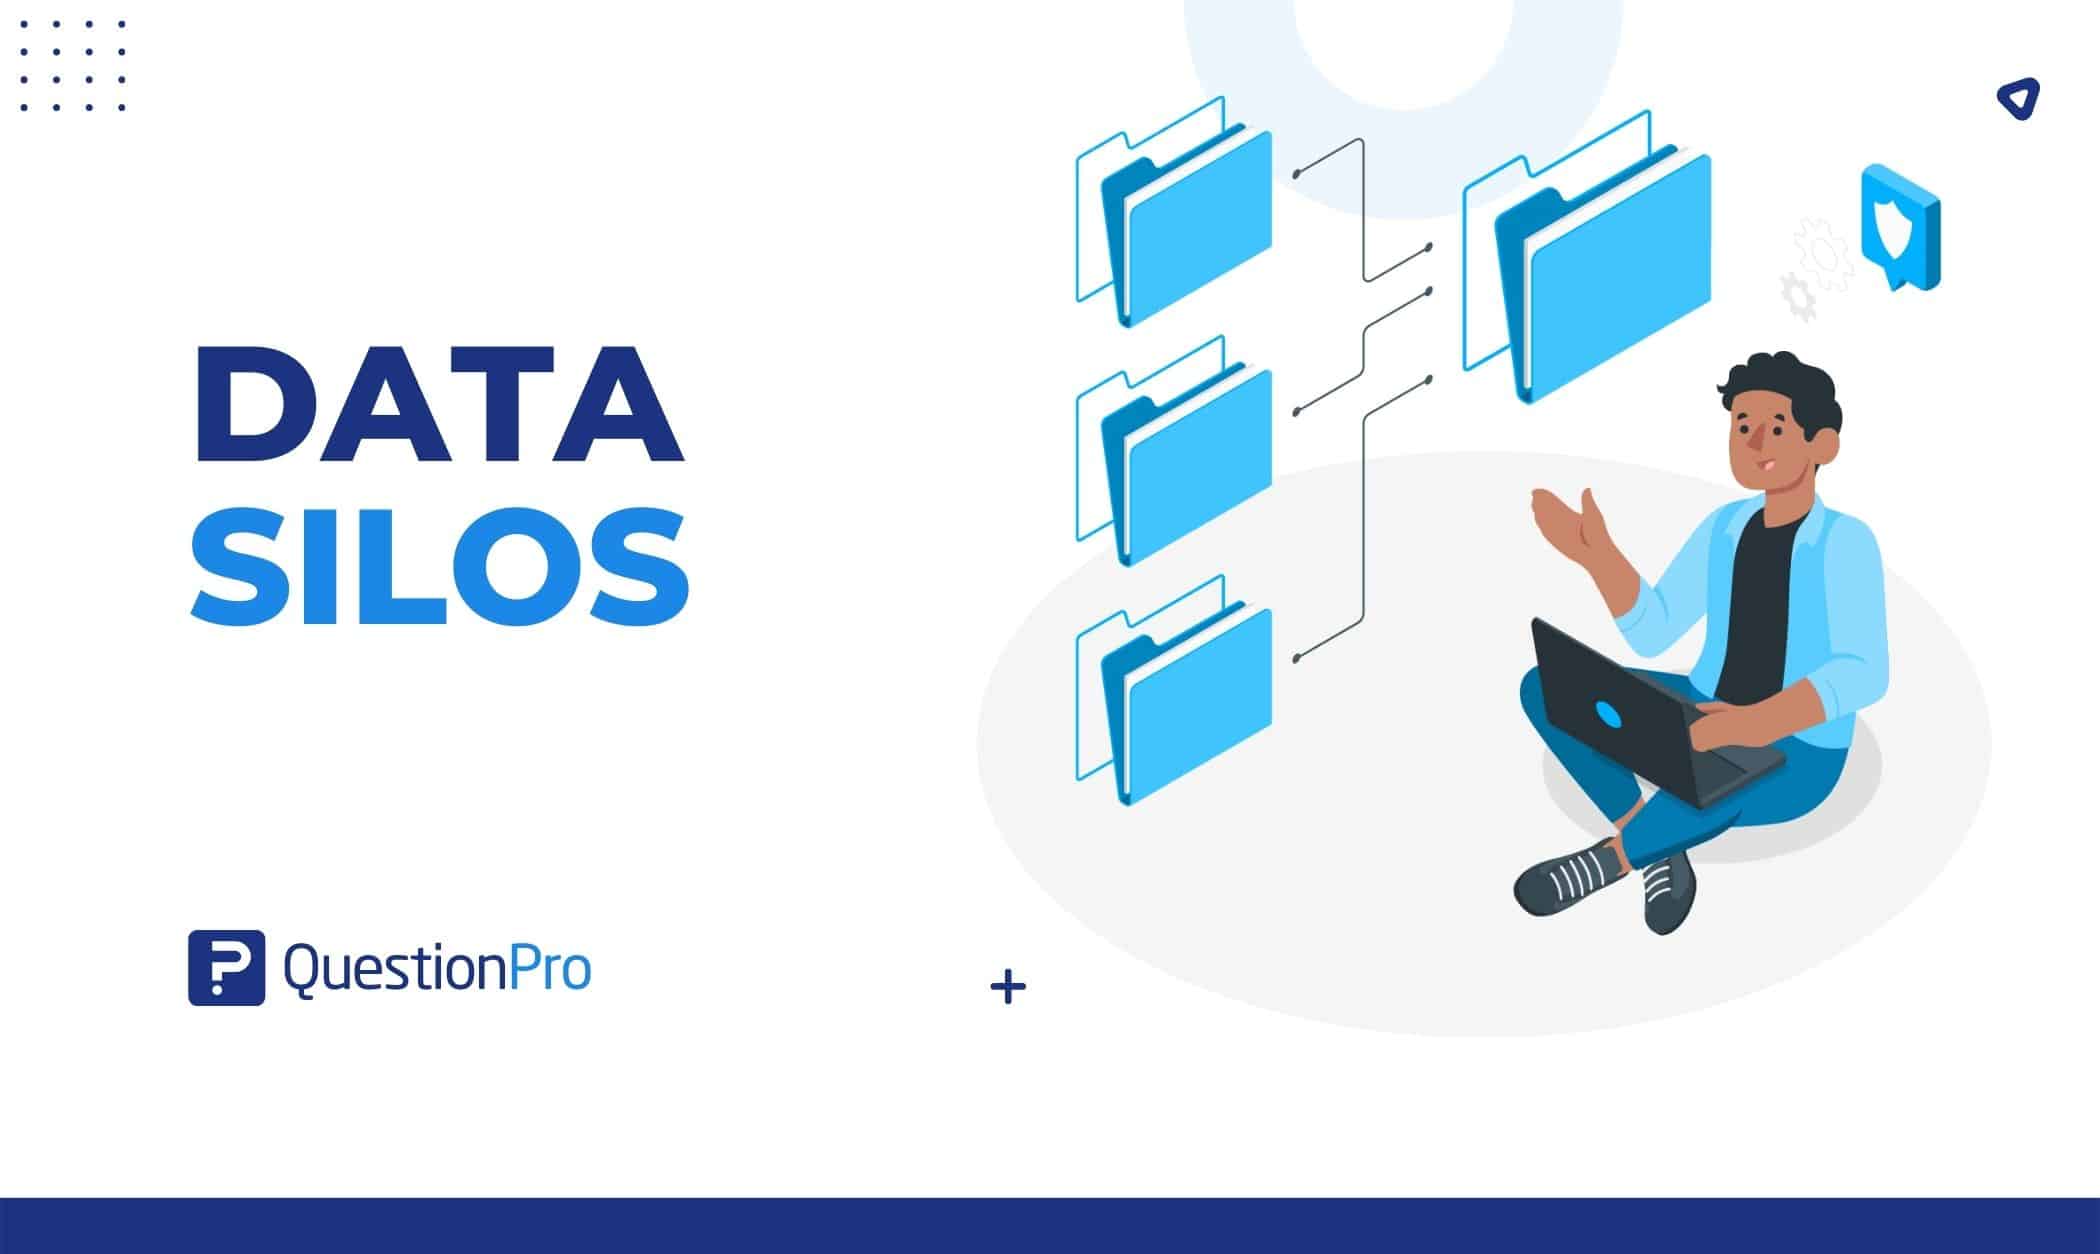 Data Silos: What it is, Negative Impact & How to break them